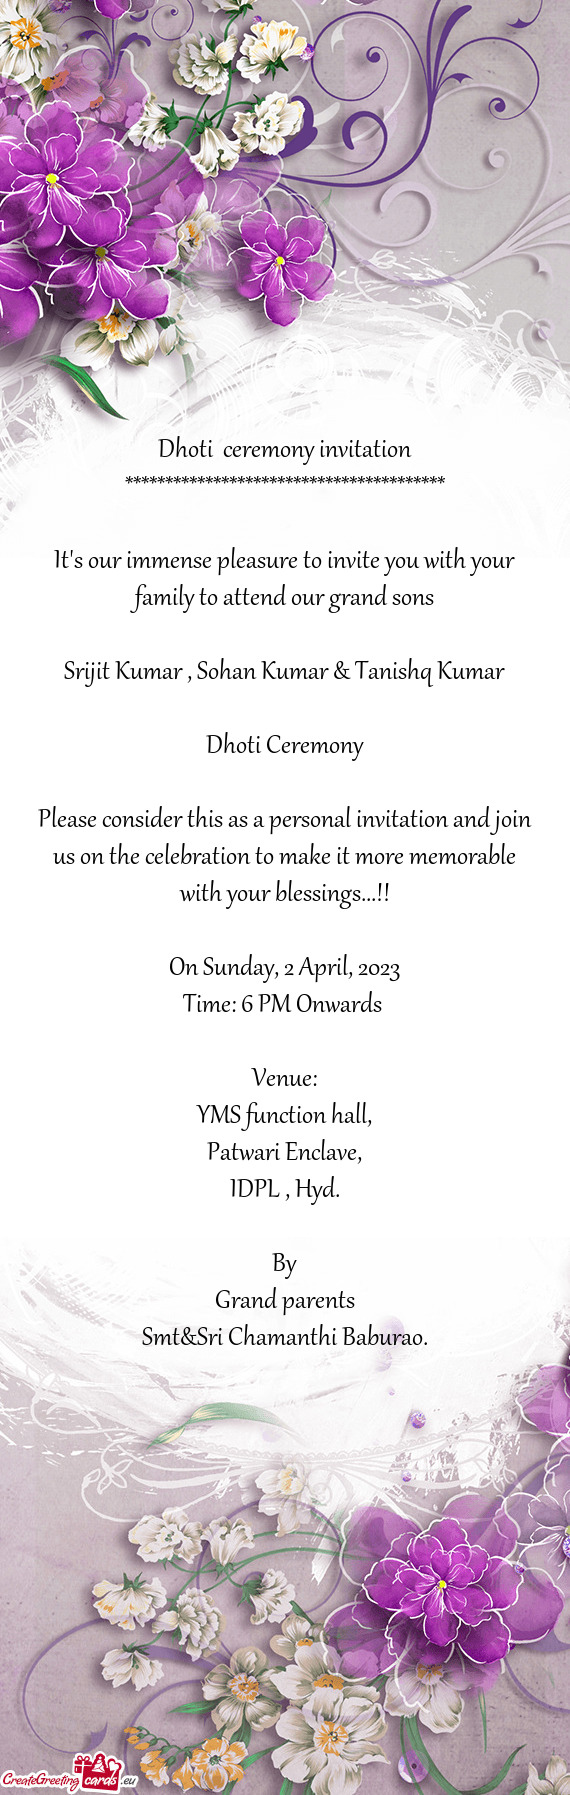 It's our immense pleasure to invite you with your family to attend our grand sons